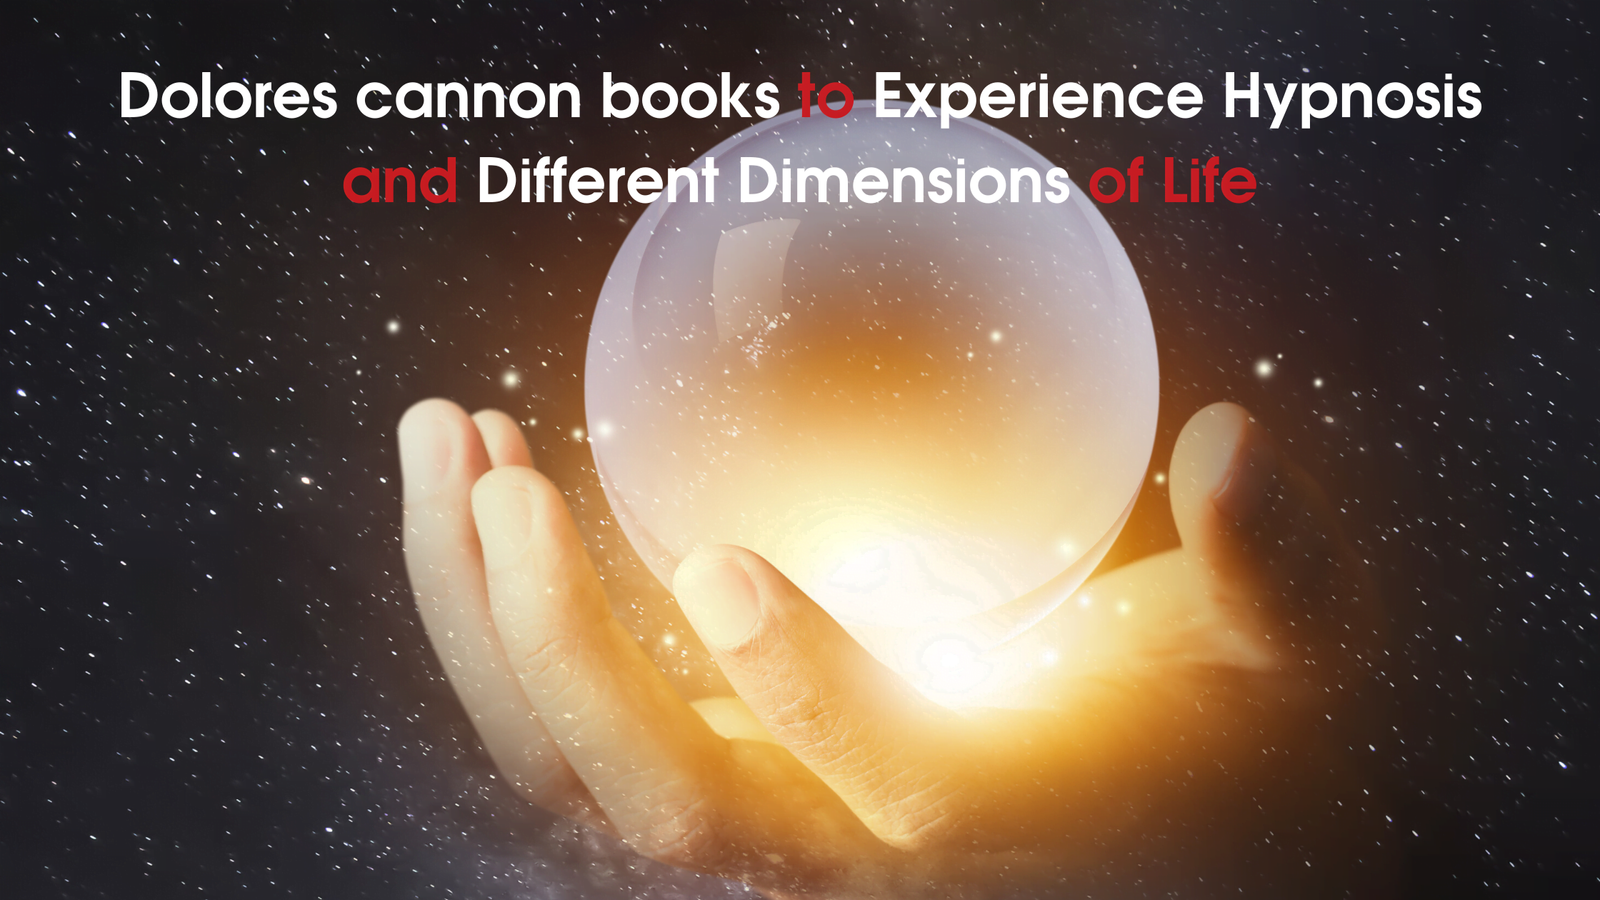 Dolores cannon books can change help you to discover the different dimensions of life!- bigbraincoach